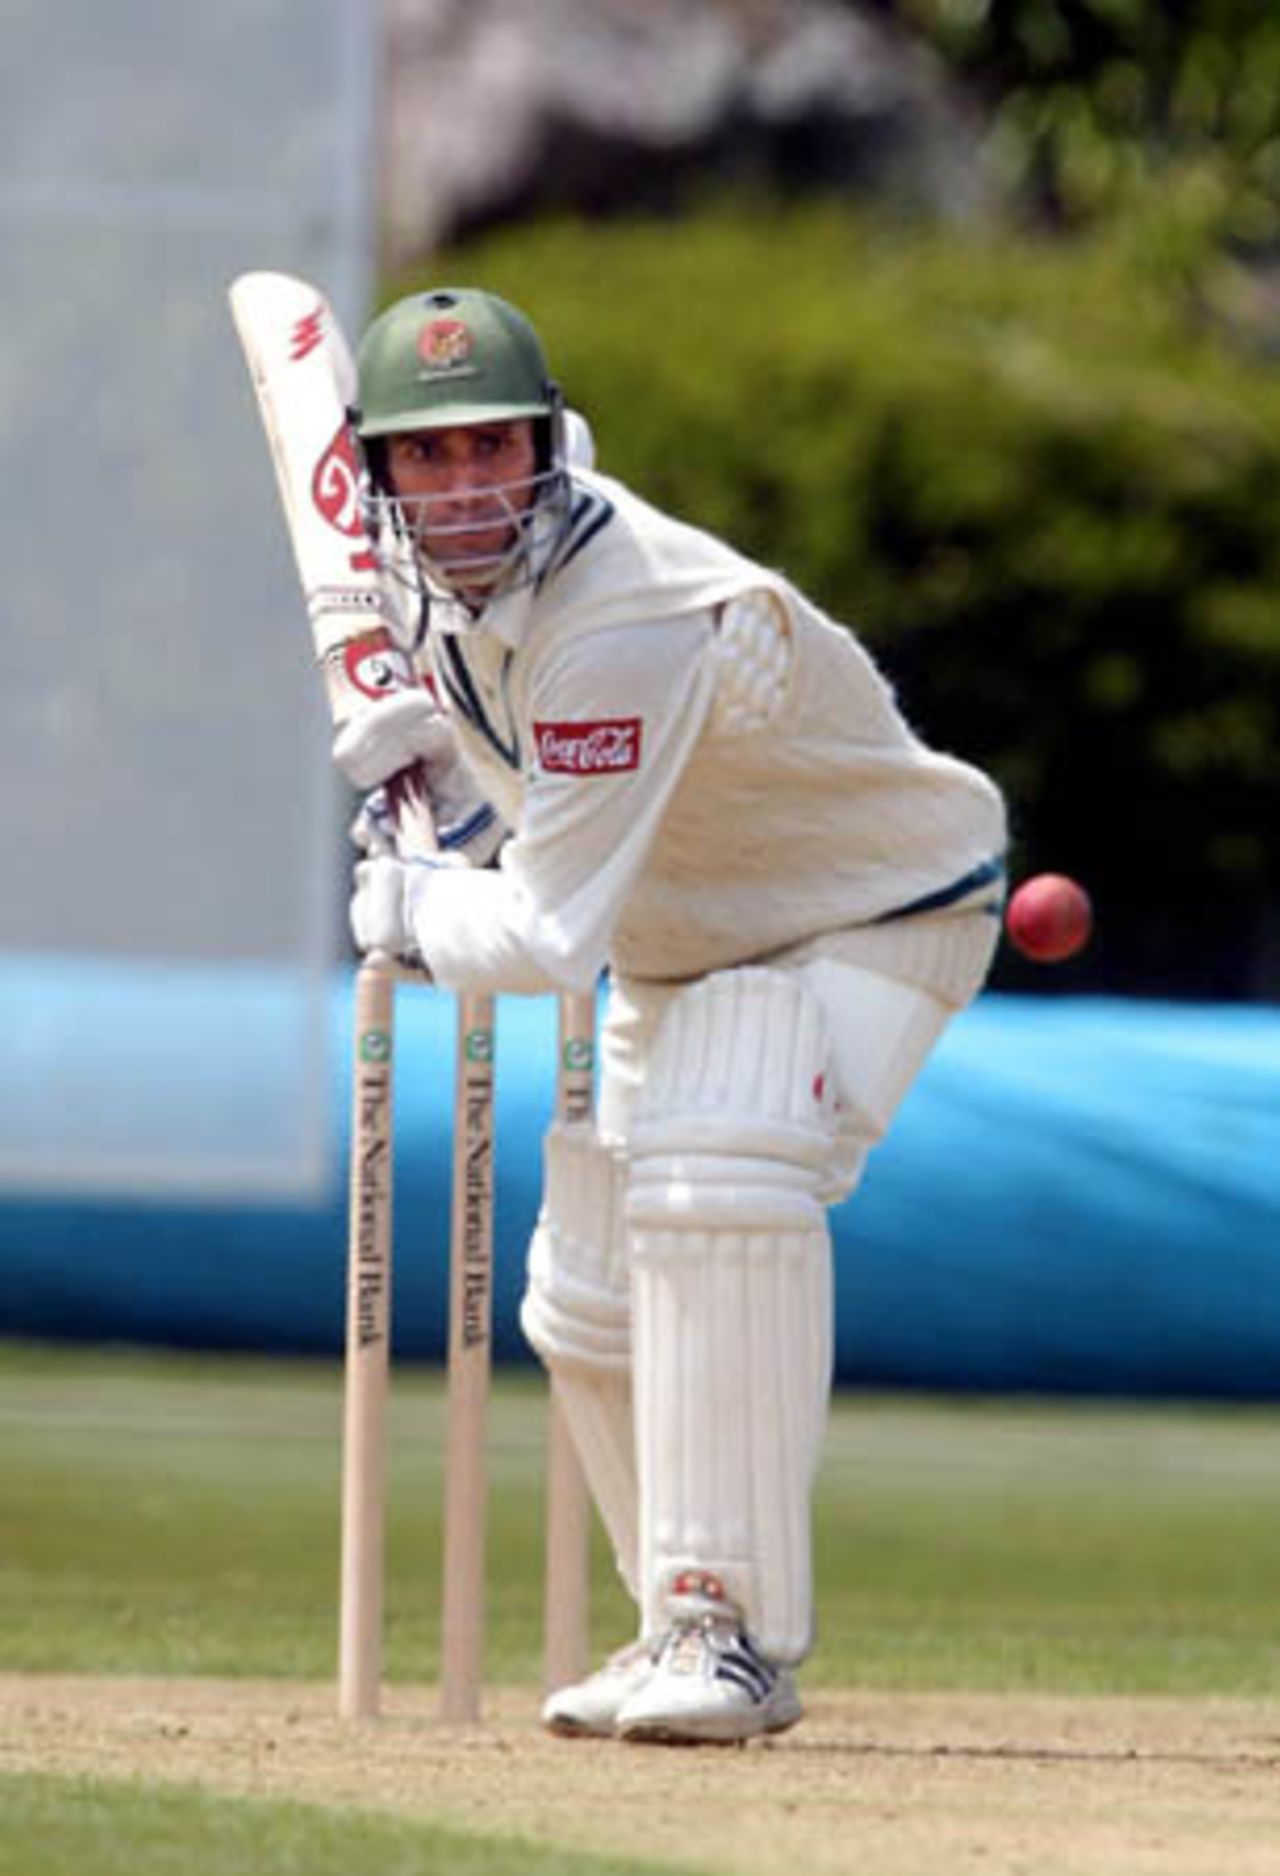 Bangladeshi batsman Khaled Mashud watchfully faces a delivery during his innings of 30 not out. Tour match: Auckland v Bangladeshis at Eden Park Outer Oval, Auckland, 12-15 Dec 2001 (12 December 2001).